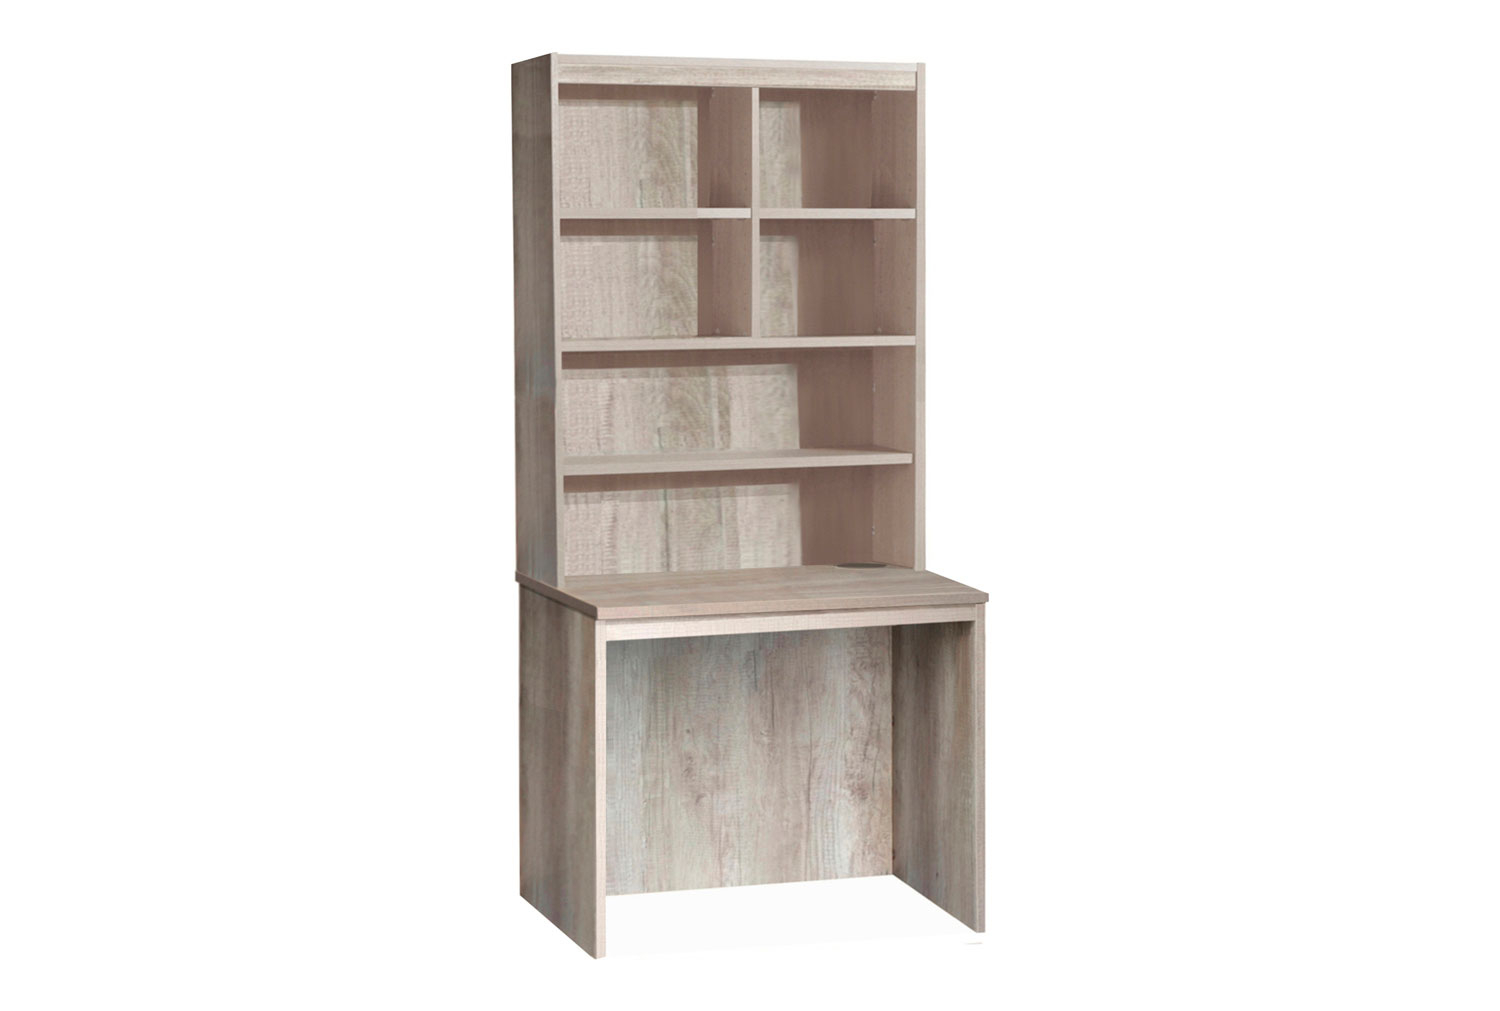 Small Office Rectangular Home Office Desk With Hutch Bookcase (Grey Nebraska), 85wx54dx182h (cm)